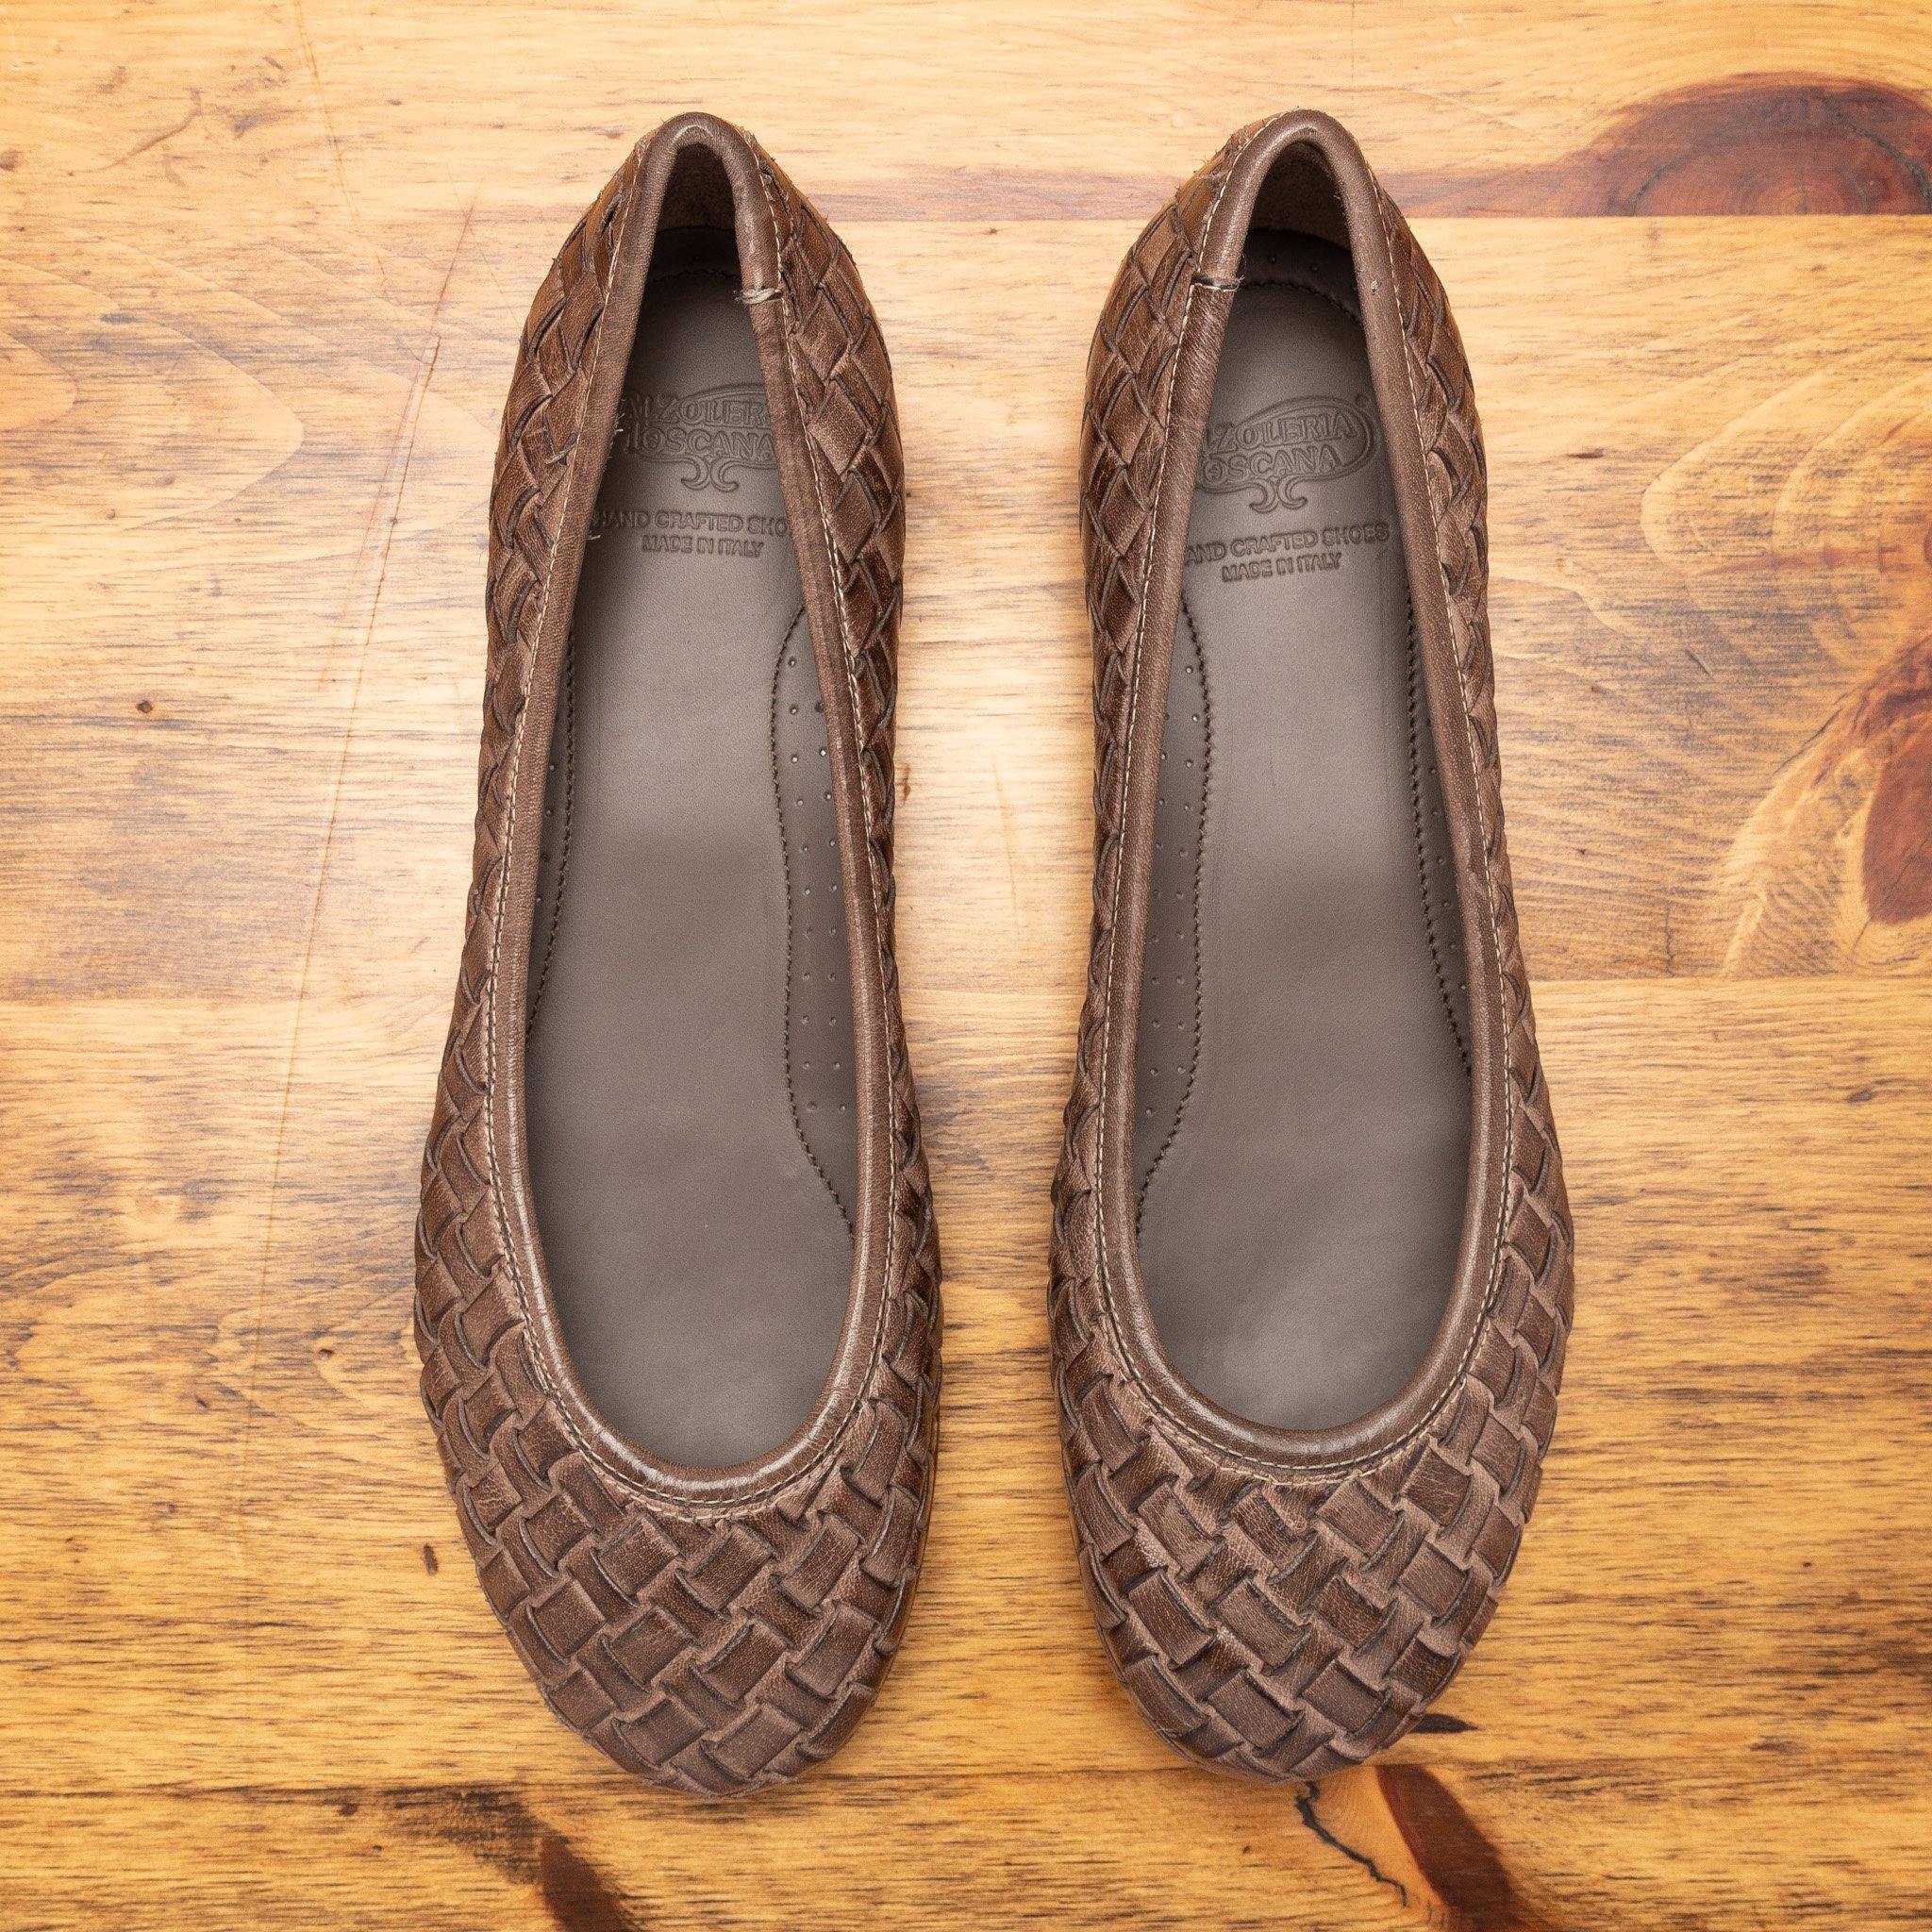 Pair of B940 Calzoleria Toscana Taupe Woven Melania Ballerina laying flat showing the branded name insole on top of a wooden table